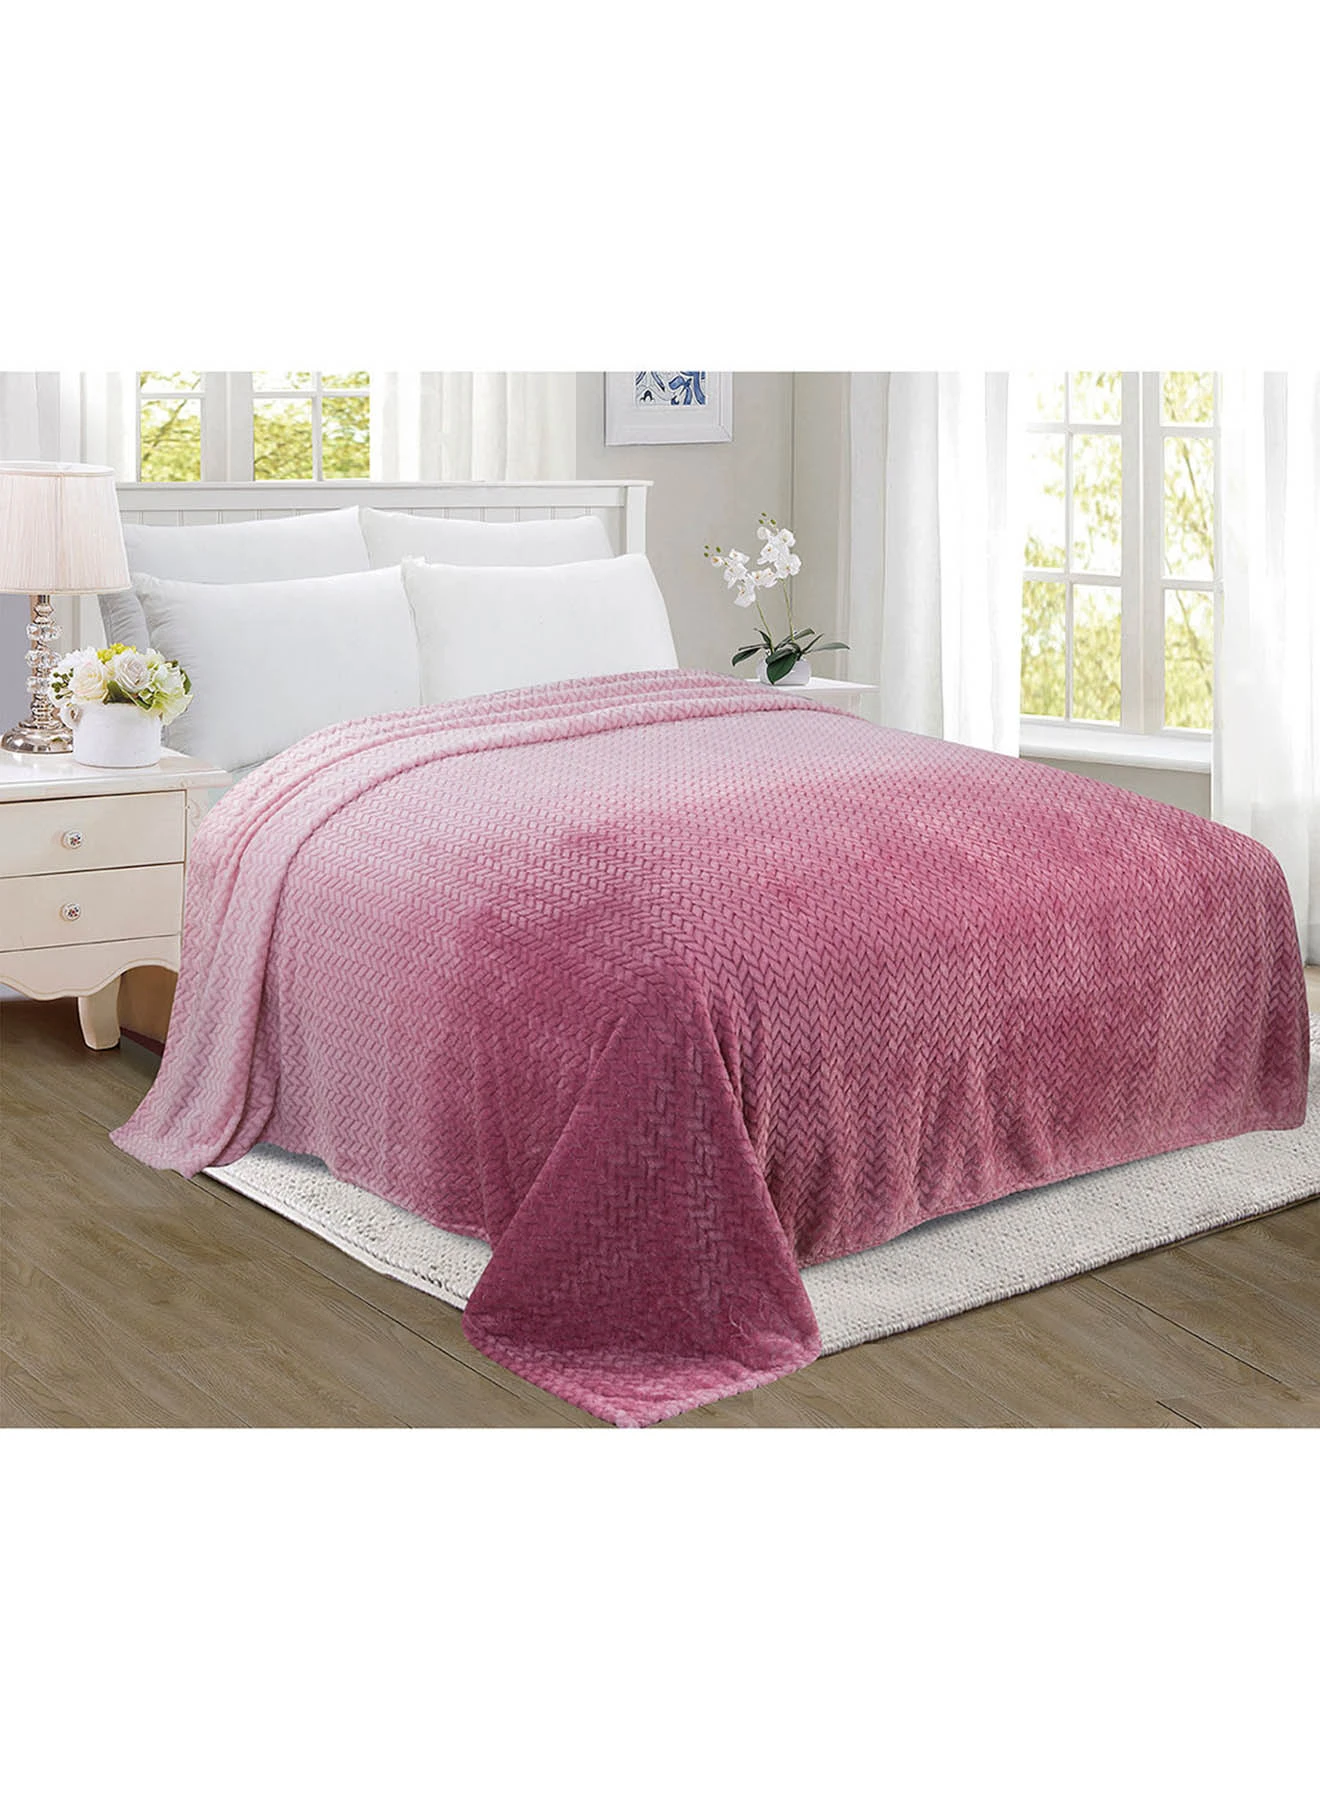 noon east Lightweight Summer Blanket Queen Size 280 GSM Jacquard Extra Soft Fleece All Season Blanket Bed And Sofa Throw  160x220 cm Pink